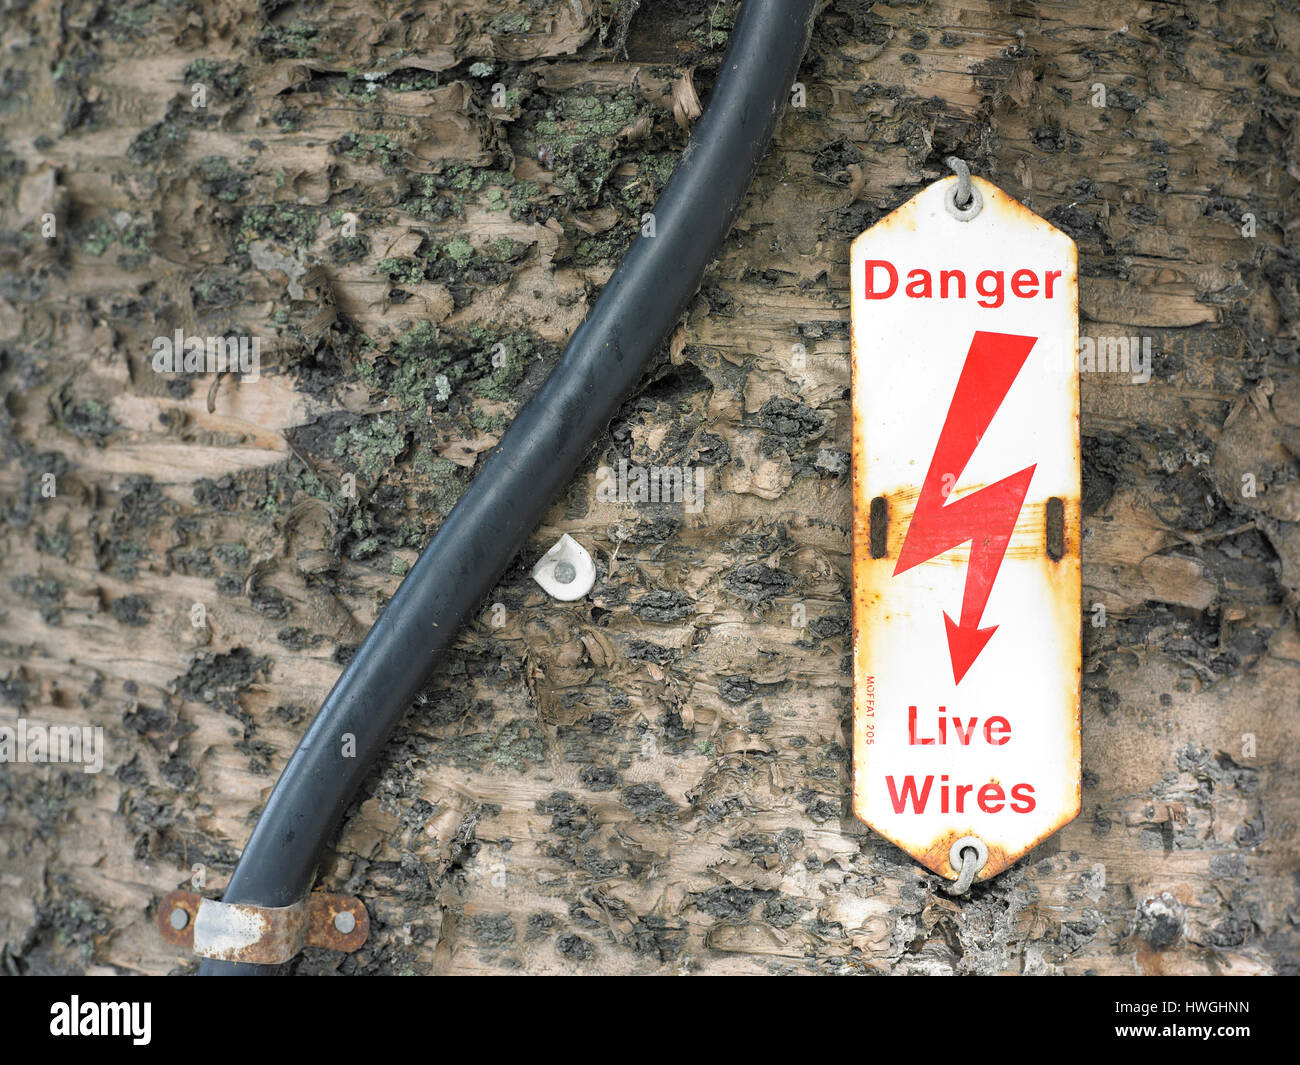 Danger live wires sign and high power cable Stock Photo